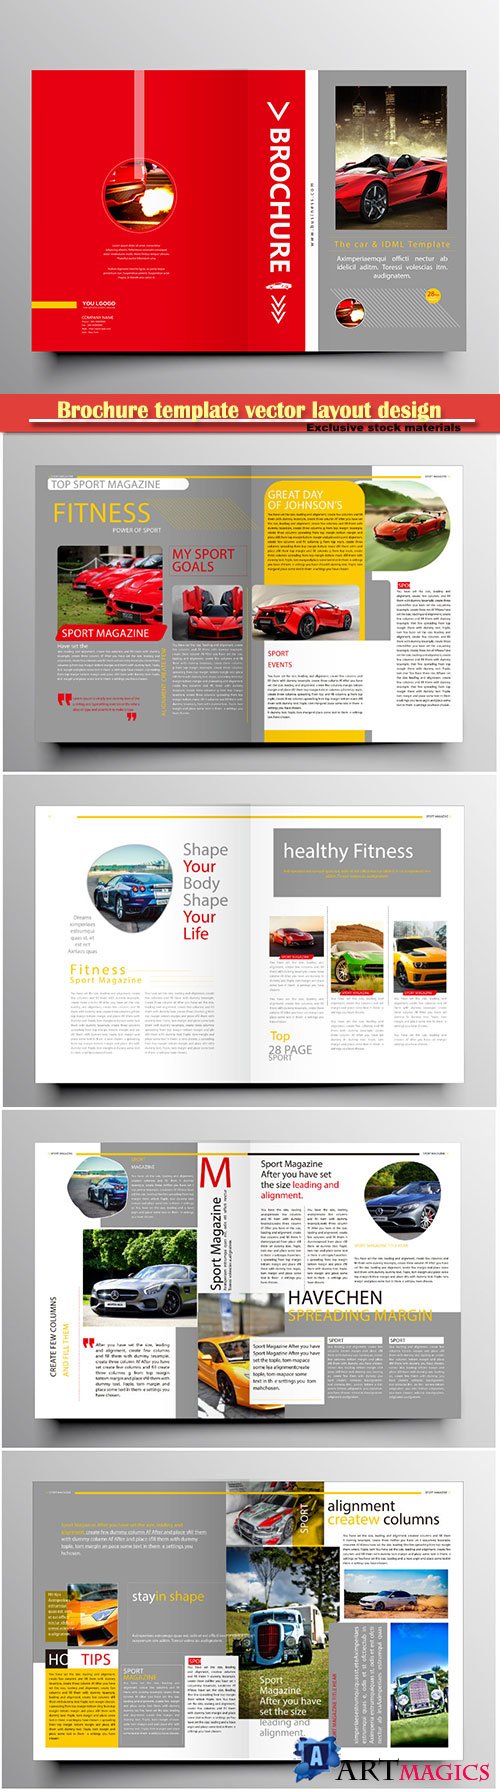 Brochure template vector layout design, corporate business annual report, magazine, flyer mockup # 186